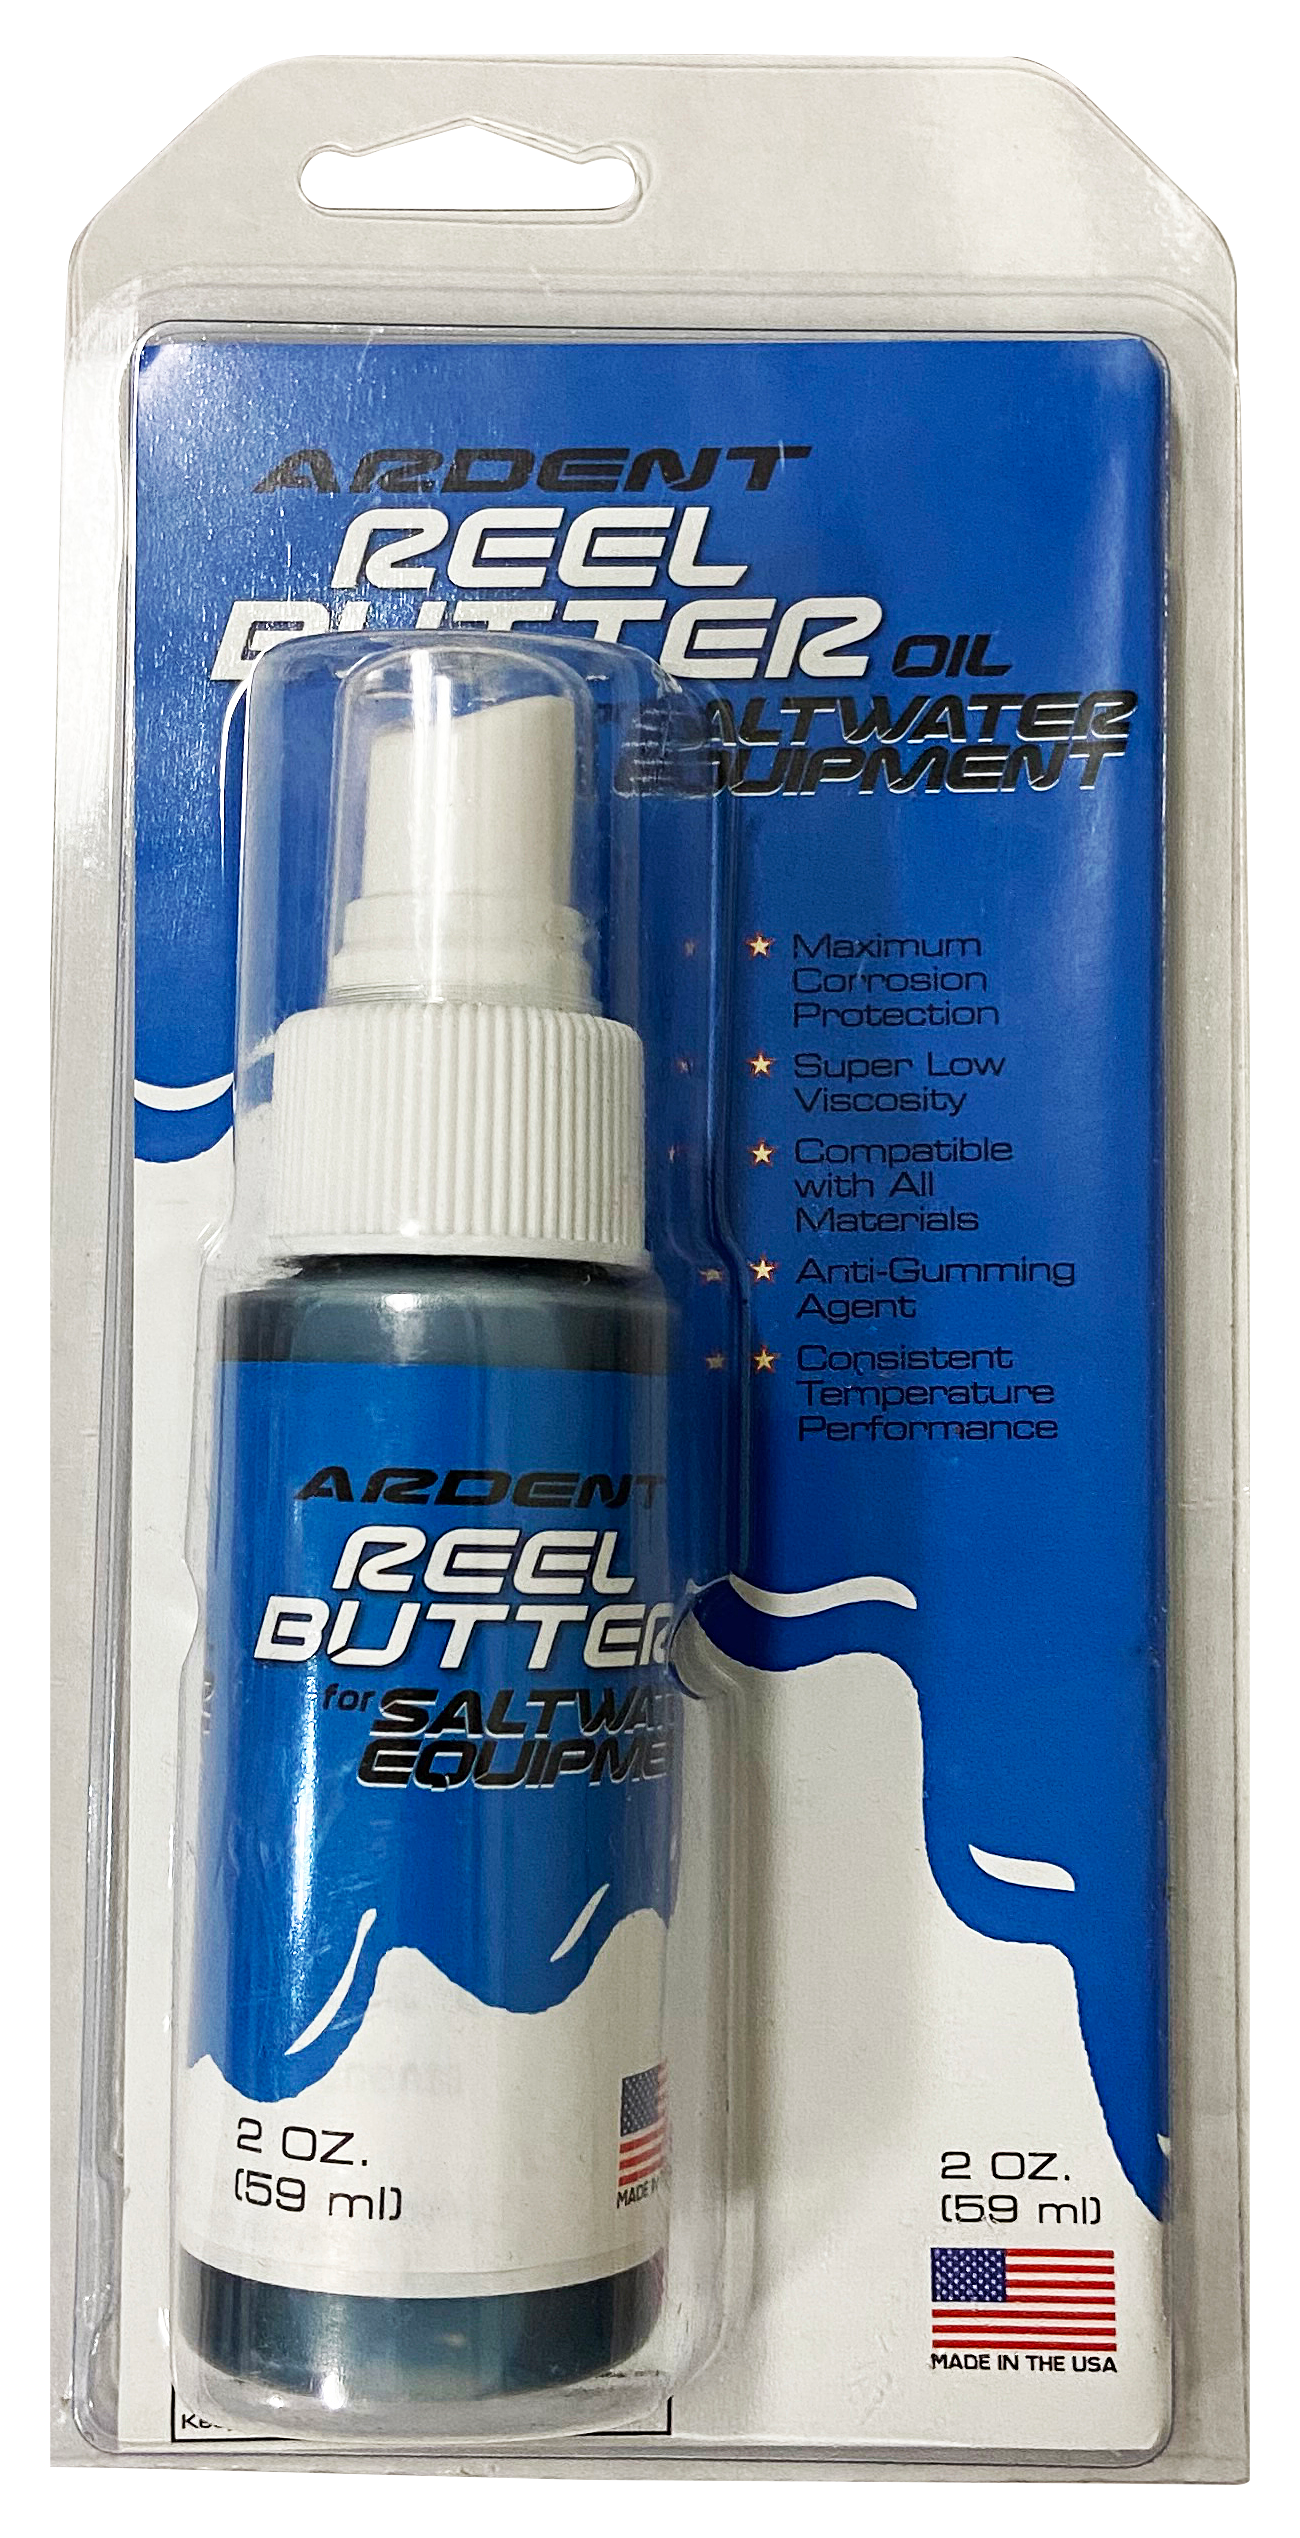  Ardent Reel Butter Oil, Multi, One Size : Fishing